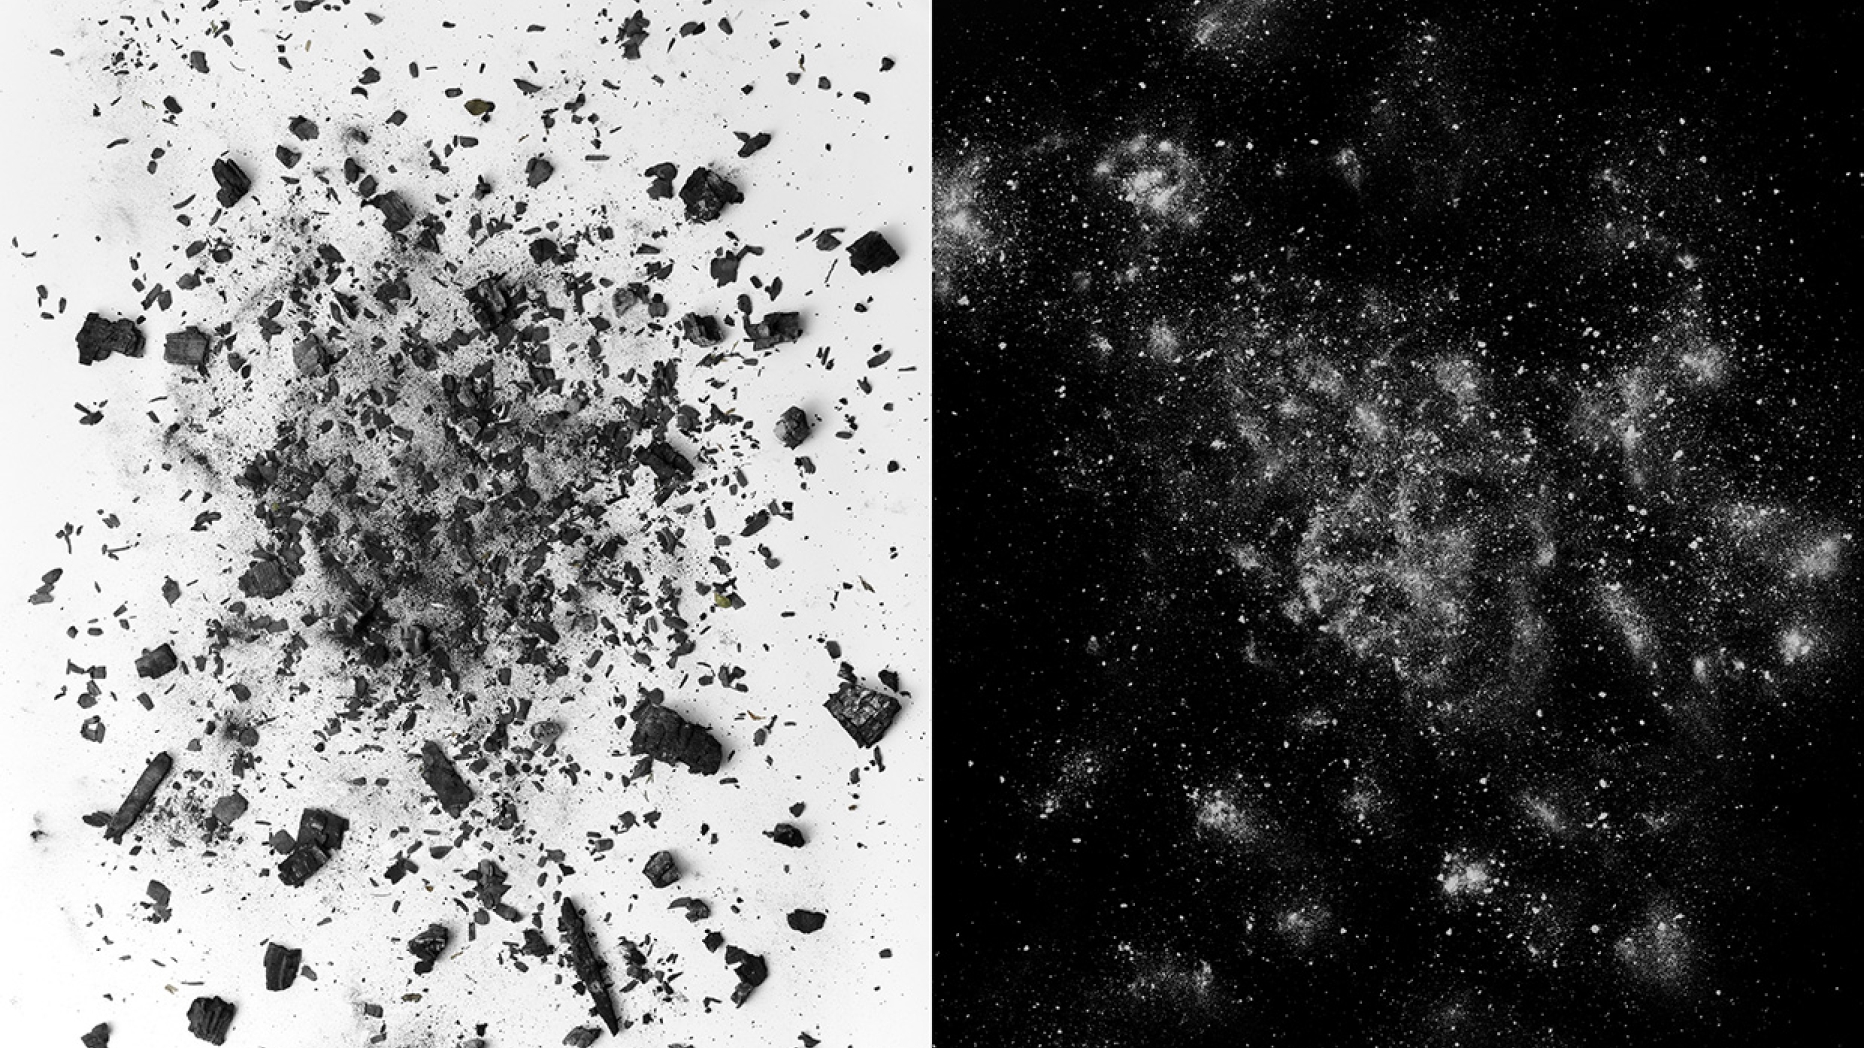 A photo of scattered debris in two parts on the left the debris is black on a white background on the right it is reversed